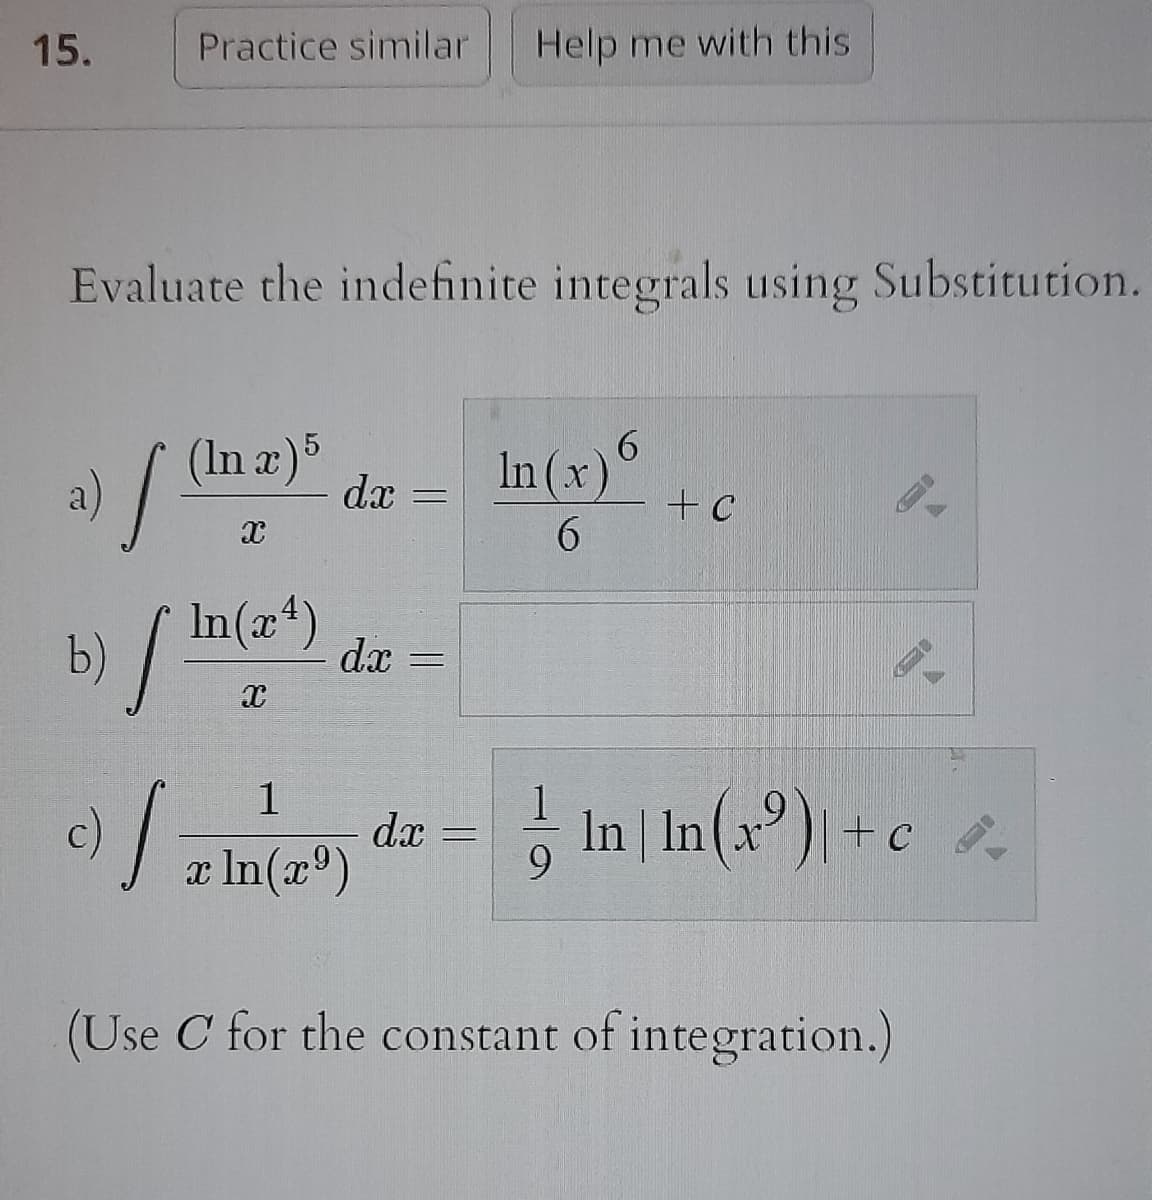 15.
Practice similar Help me with this
Evaluate the indefinite integrals using Substitution.
a) (In x) 5
I
In(x²)
b) | In
of
√
x
dx
dx
1
x In (x³)
In(x)
6
+ C
de = ln ln(x²)+c.
|
dx
(Use C for the constant of integration.)